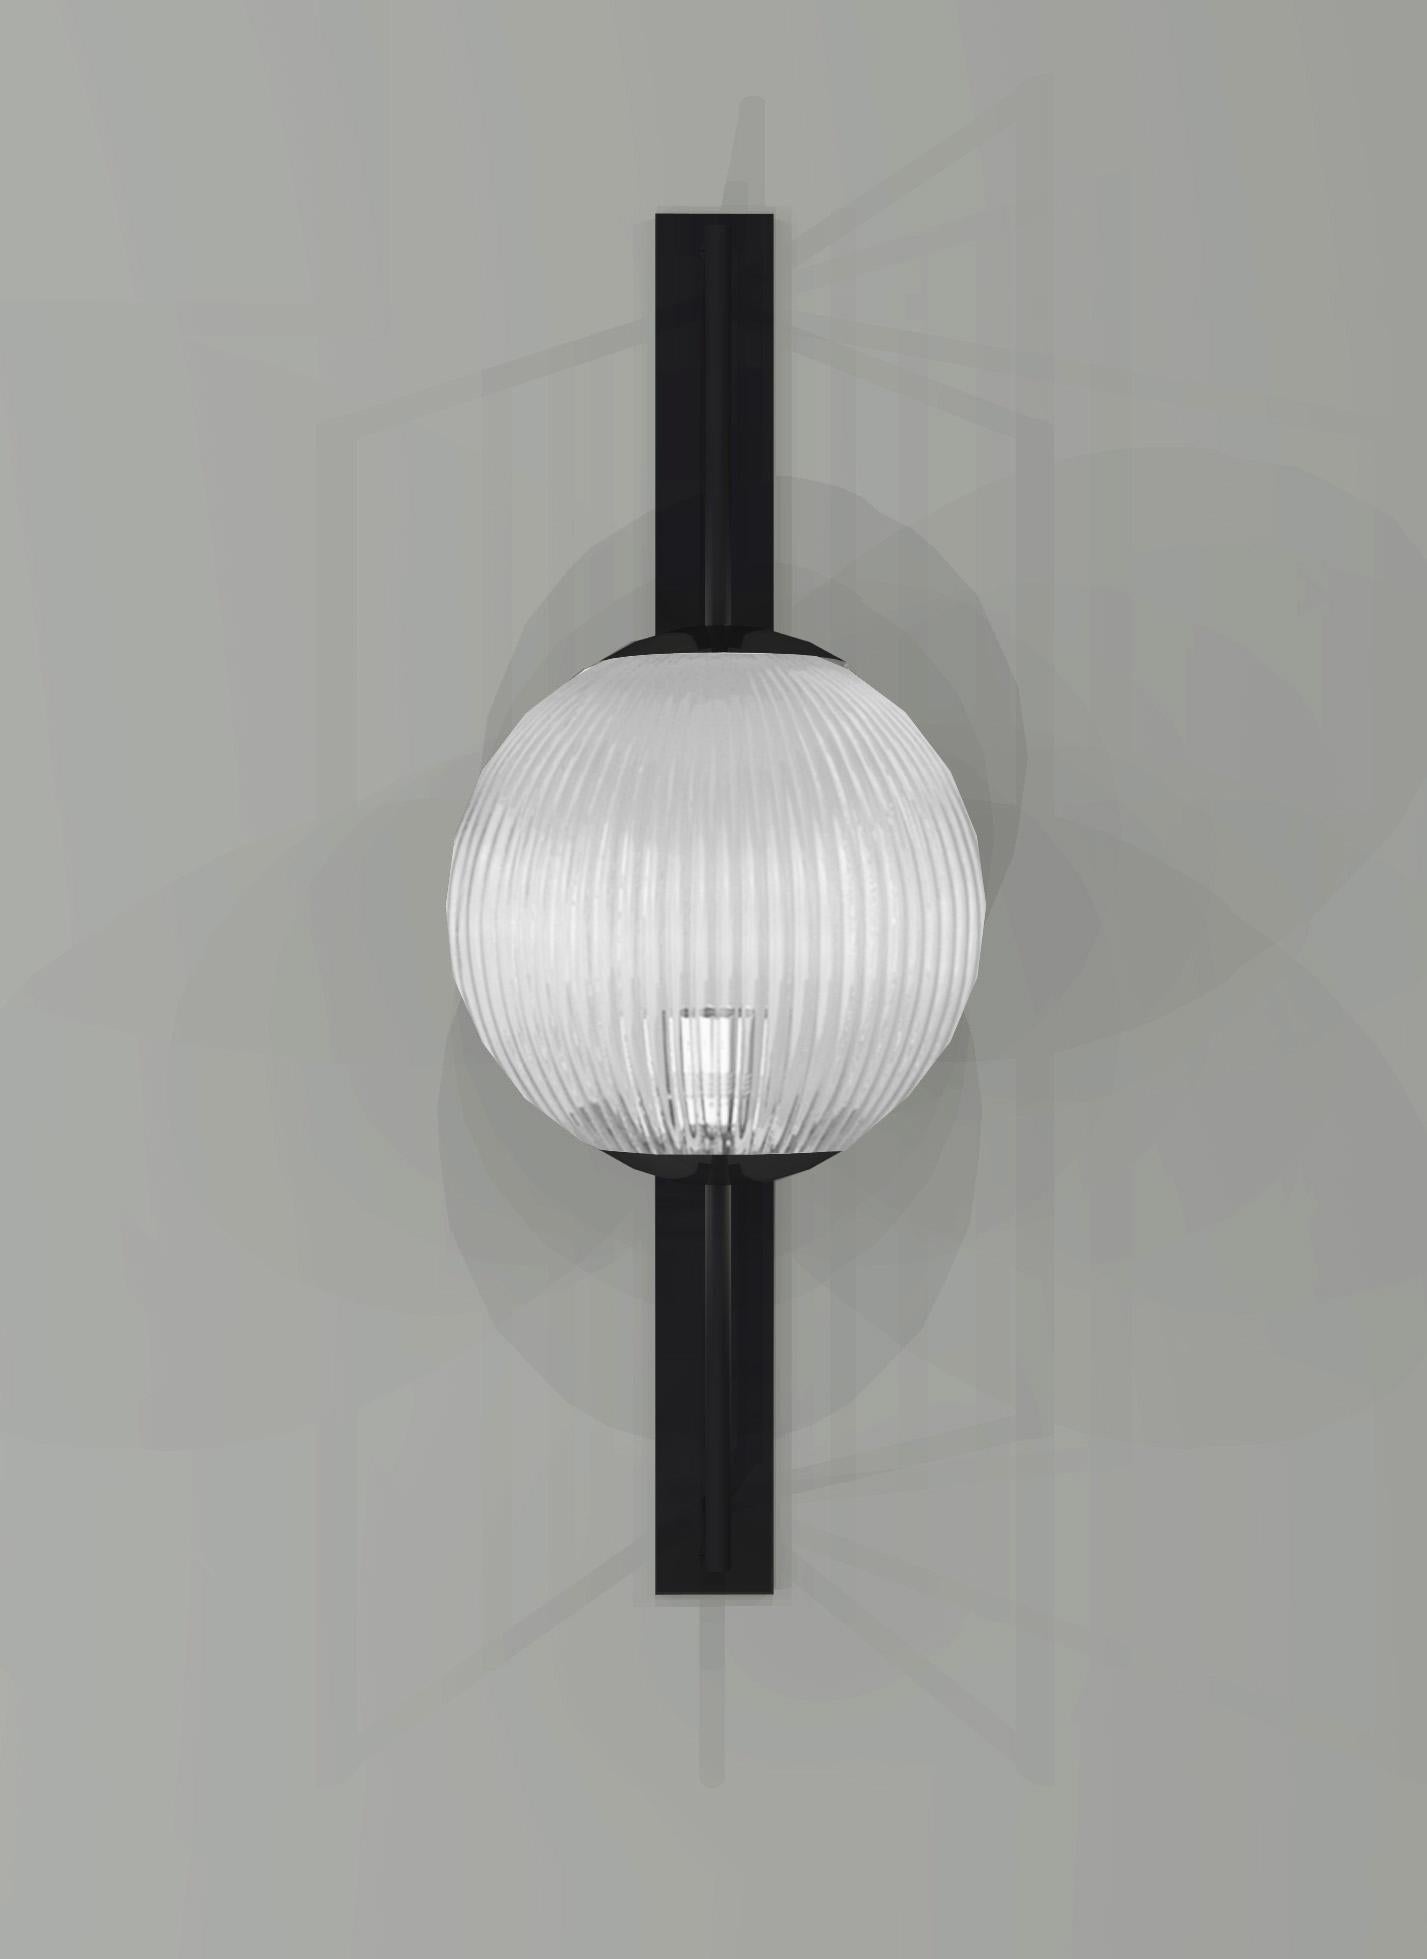 The inspiration of shape for this wall light is taken from concrete pattern design, lines and circles embossed onto the concrete panel. The concept for materials is taken from the Industrial design, metal and glass, linear metal frame with